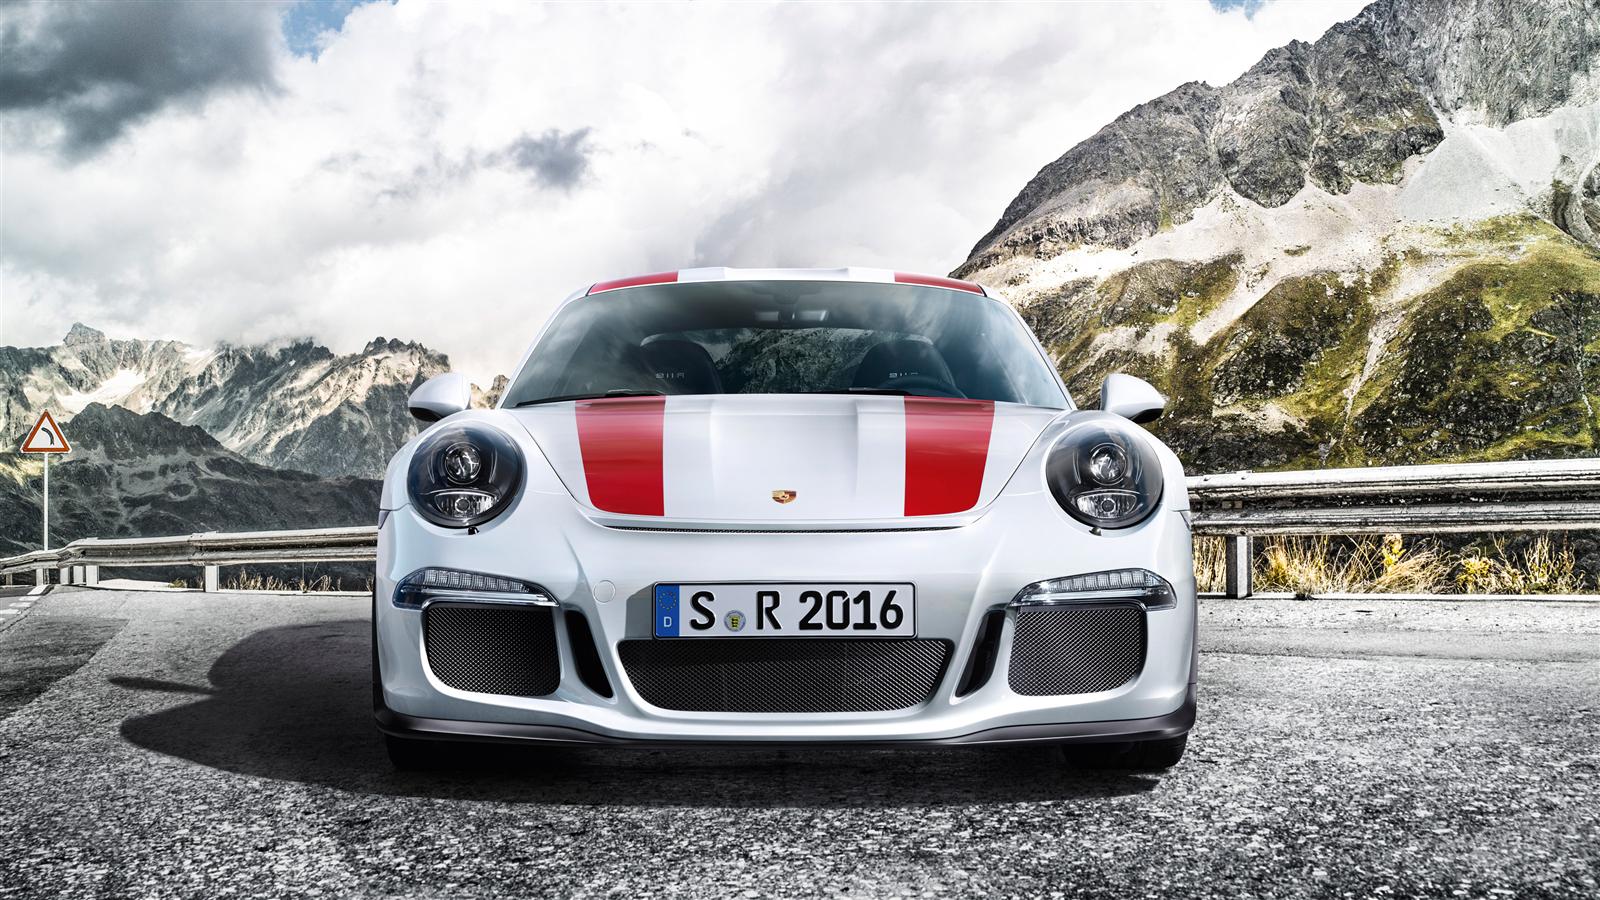 Porsche Halts the Plan of Building an Electric 911 For now